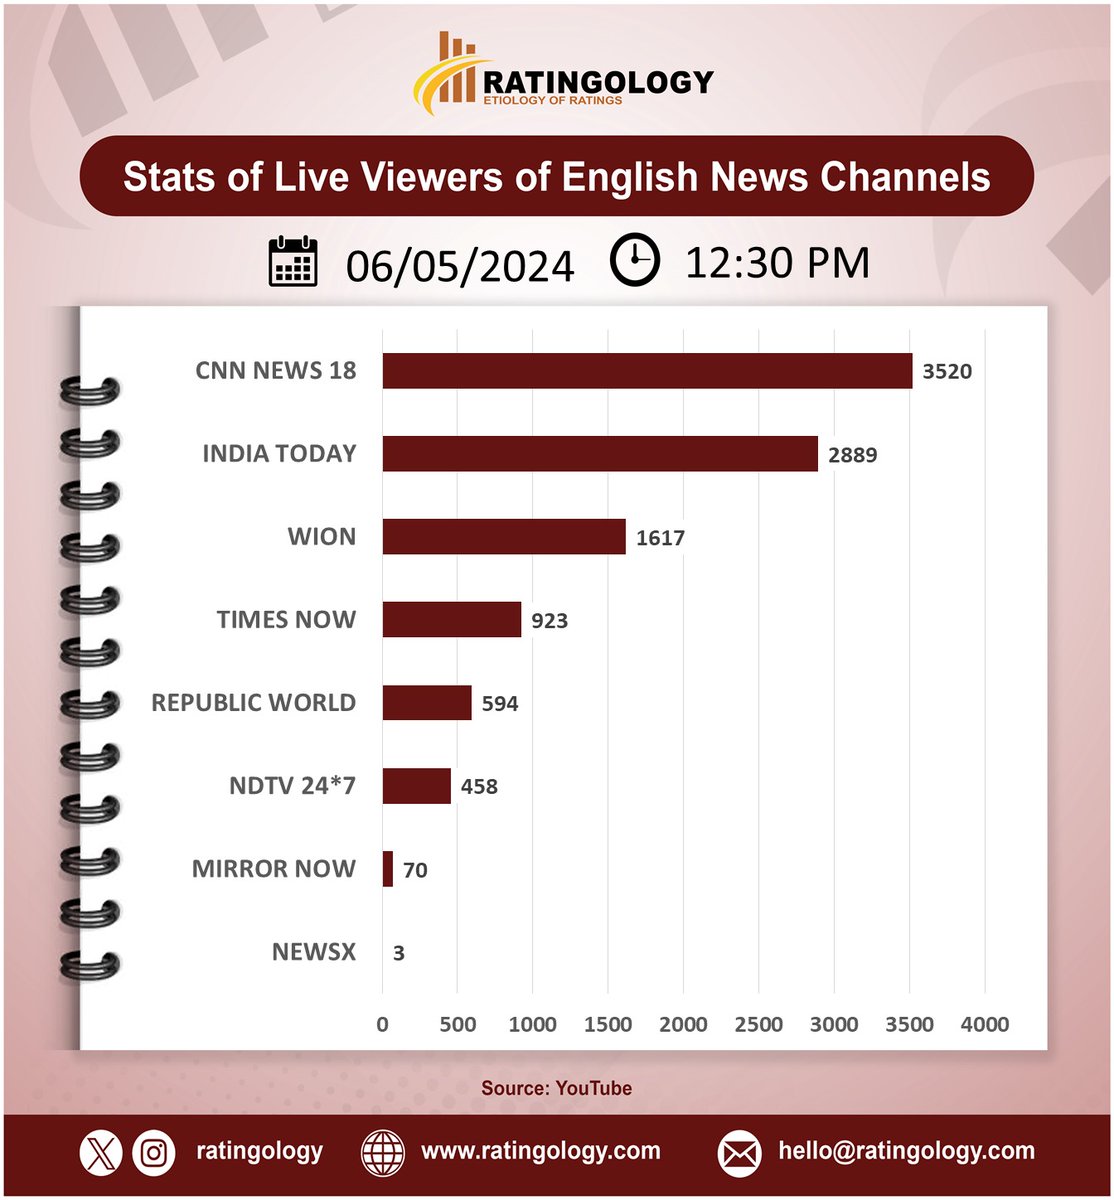 𝐒𝐭𝐚𝐭𝐬 𝐨𝐟 𝐥𝐢𝐯𝐞 𝐯𝐢𝐞𝐰𝐞𝐫𝐬 𝐨𝐧 #Youtube of #EnglishMedia #channelsat 12:30pm, Date: 06/May/2024 #Ratingology #Mediastats #RatingsKaBaap #DataScience #IndiaToday #Wion #RepublicTV #CNNNews18 #TimesNow #NewsX #NDTV24x7 #MirrorNow